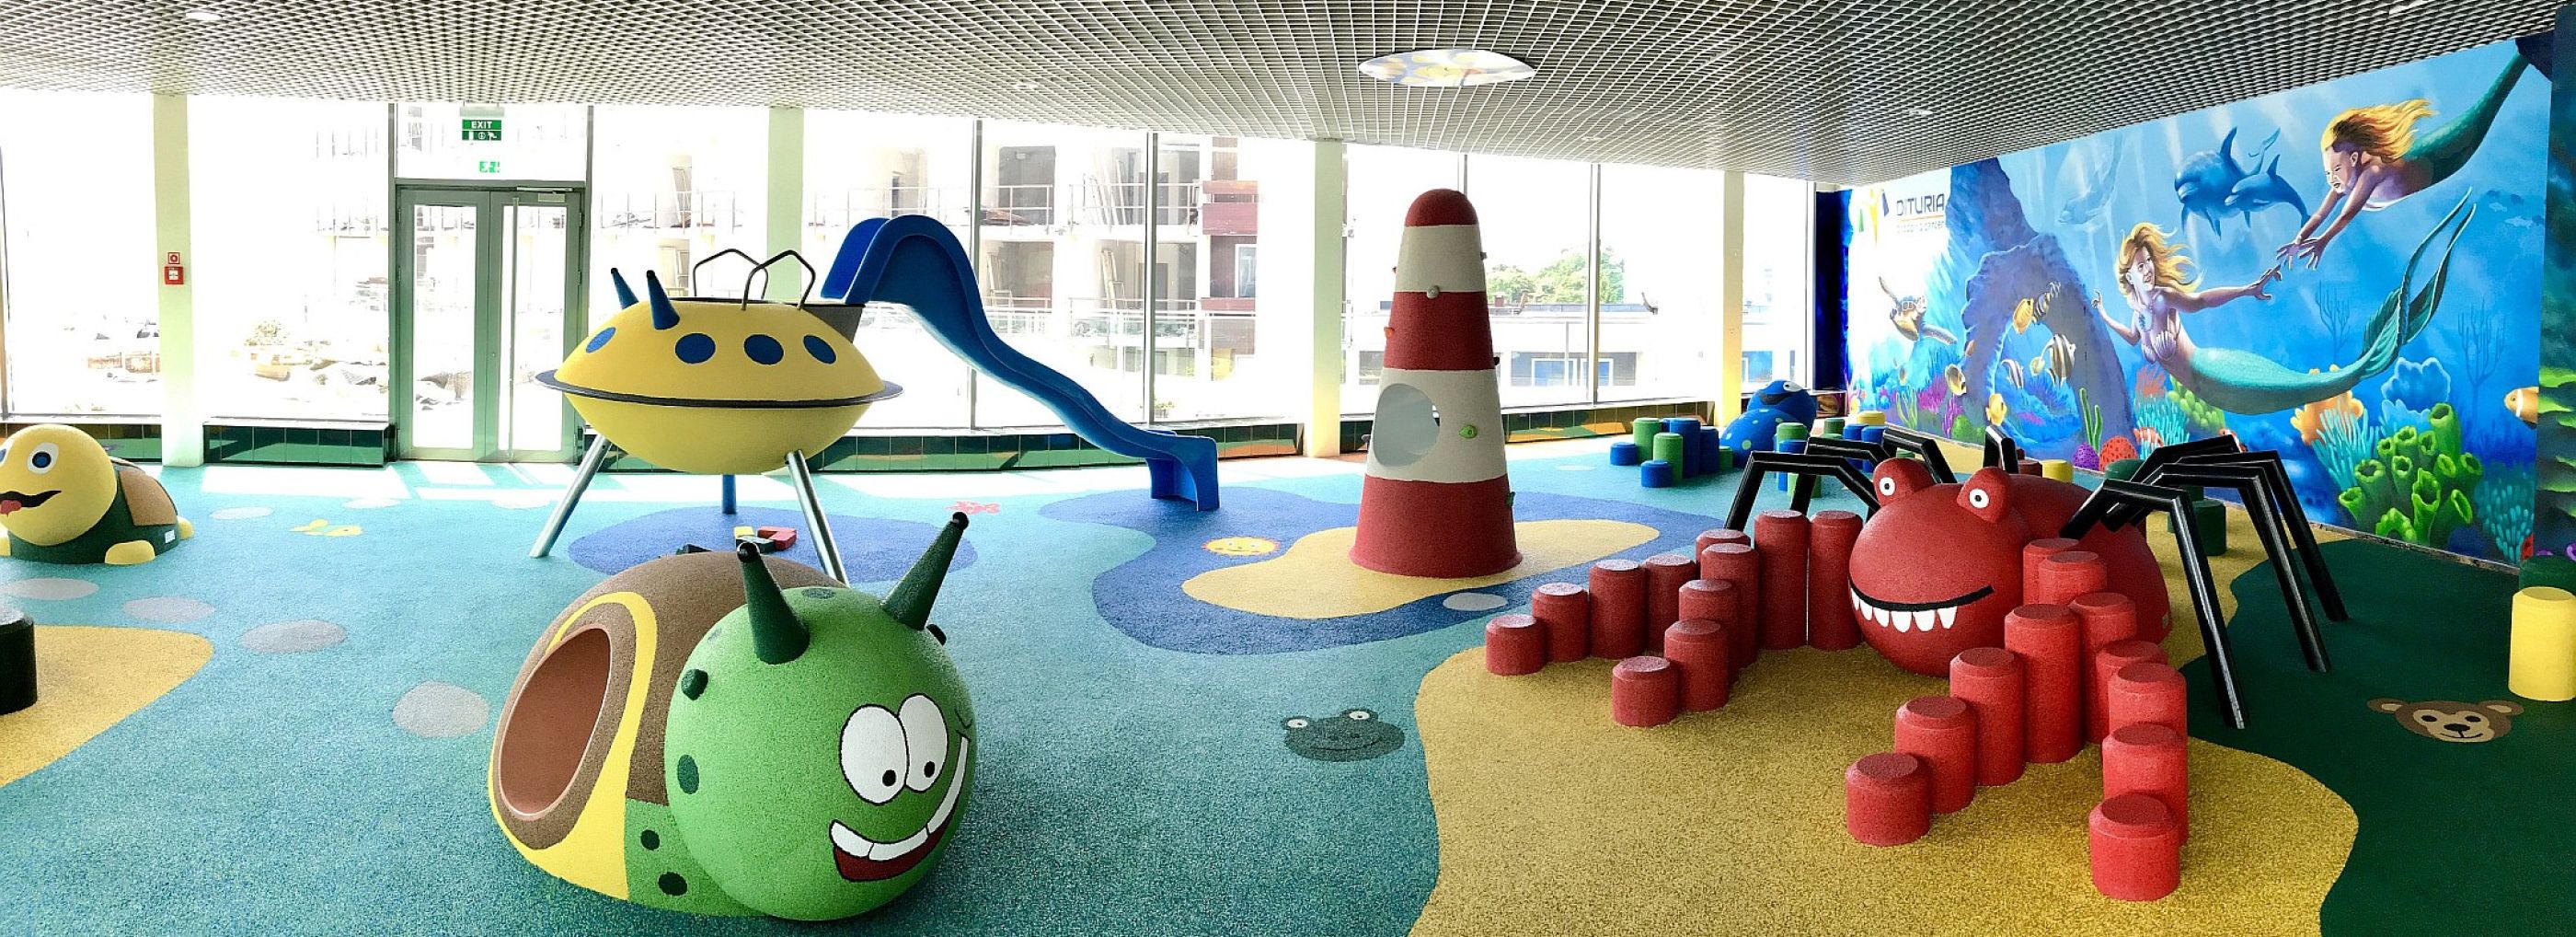 Beach theme indoor playground with a 3D spider and snail play animal.